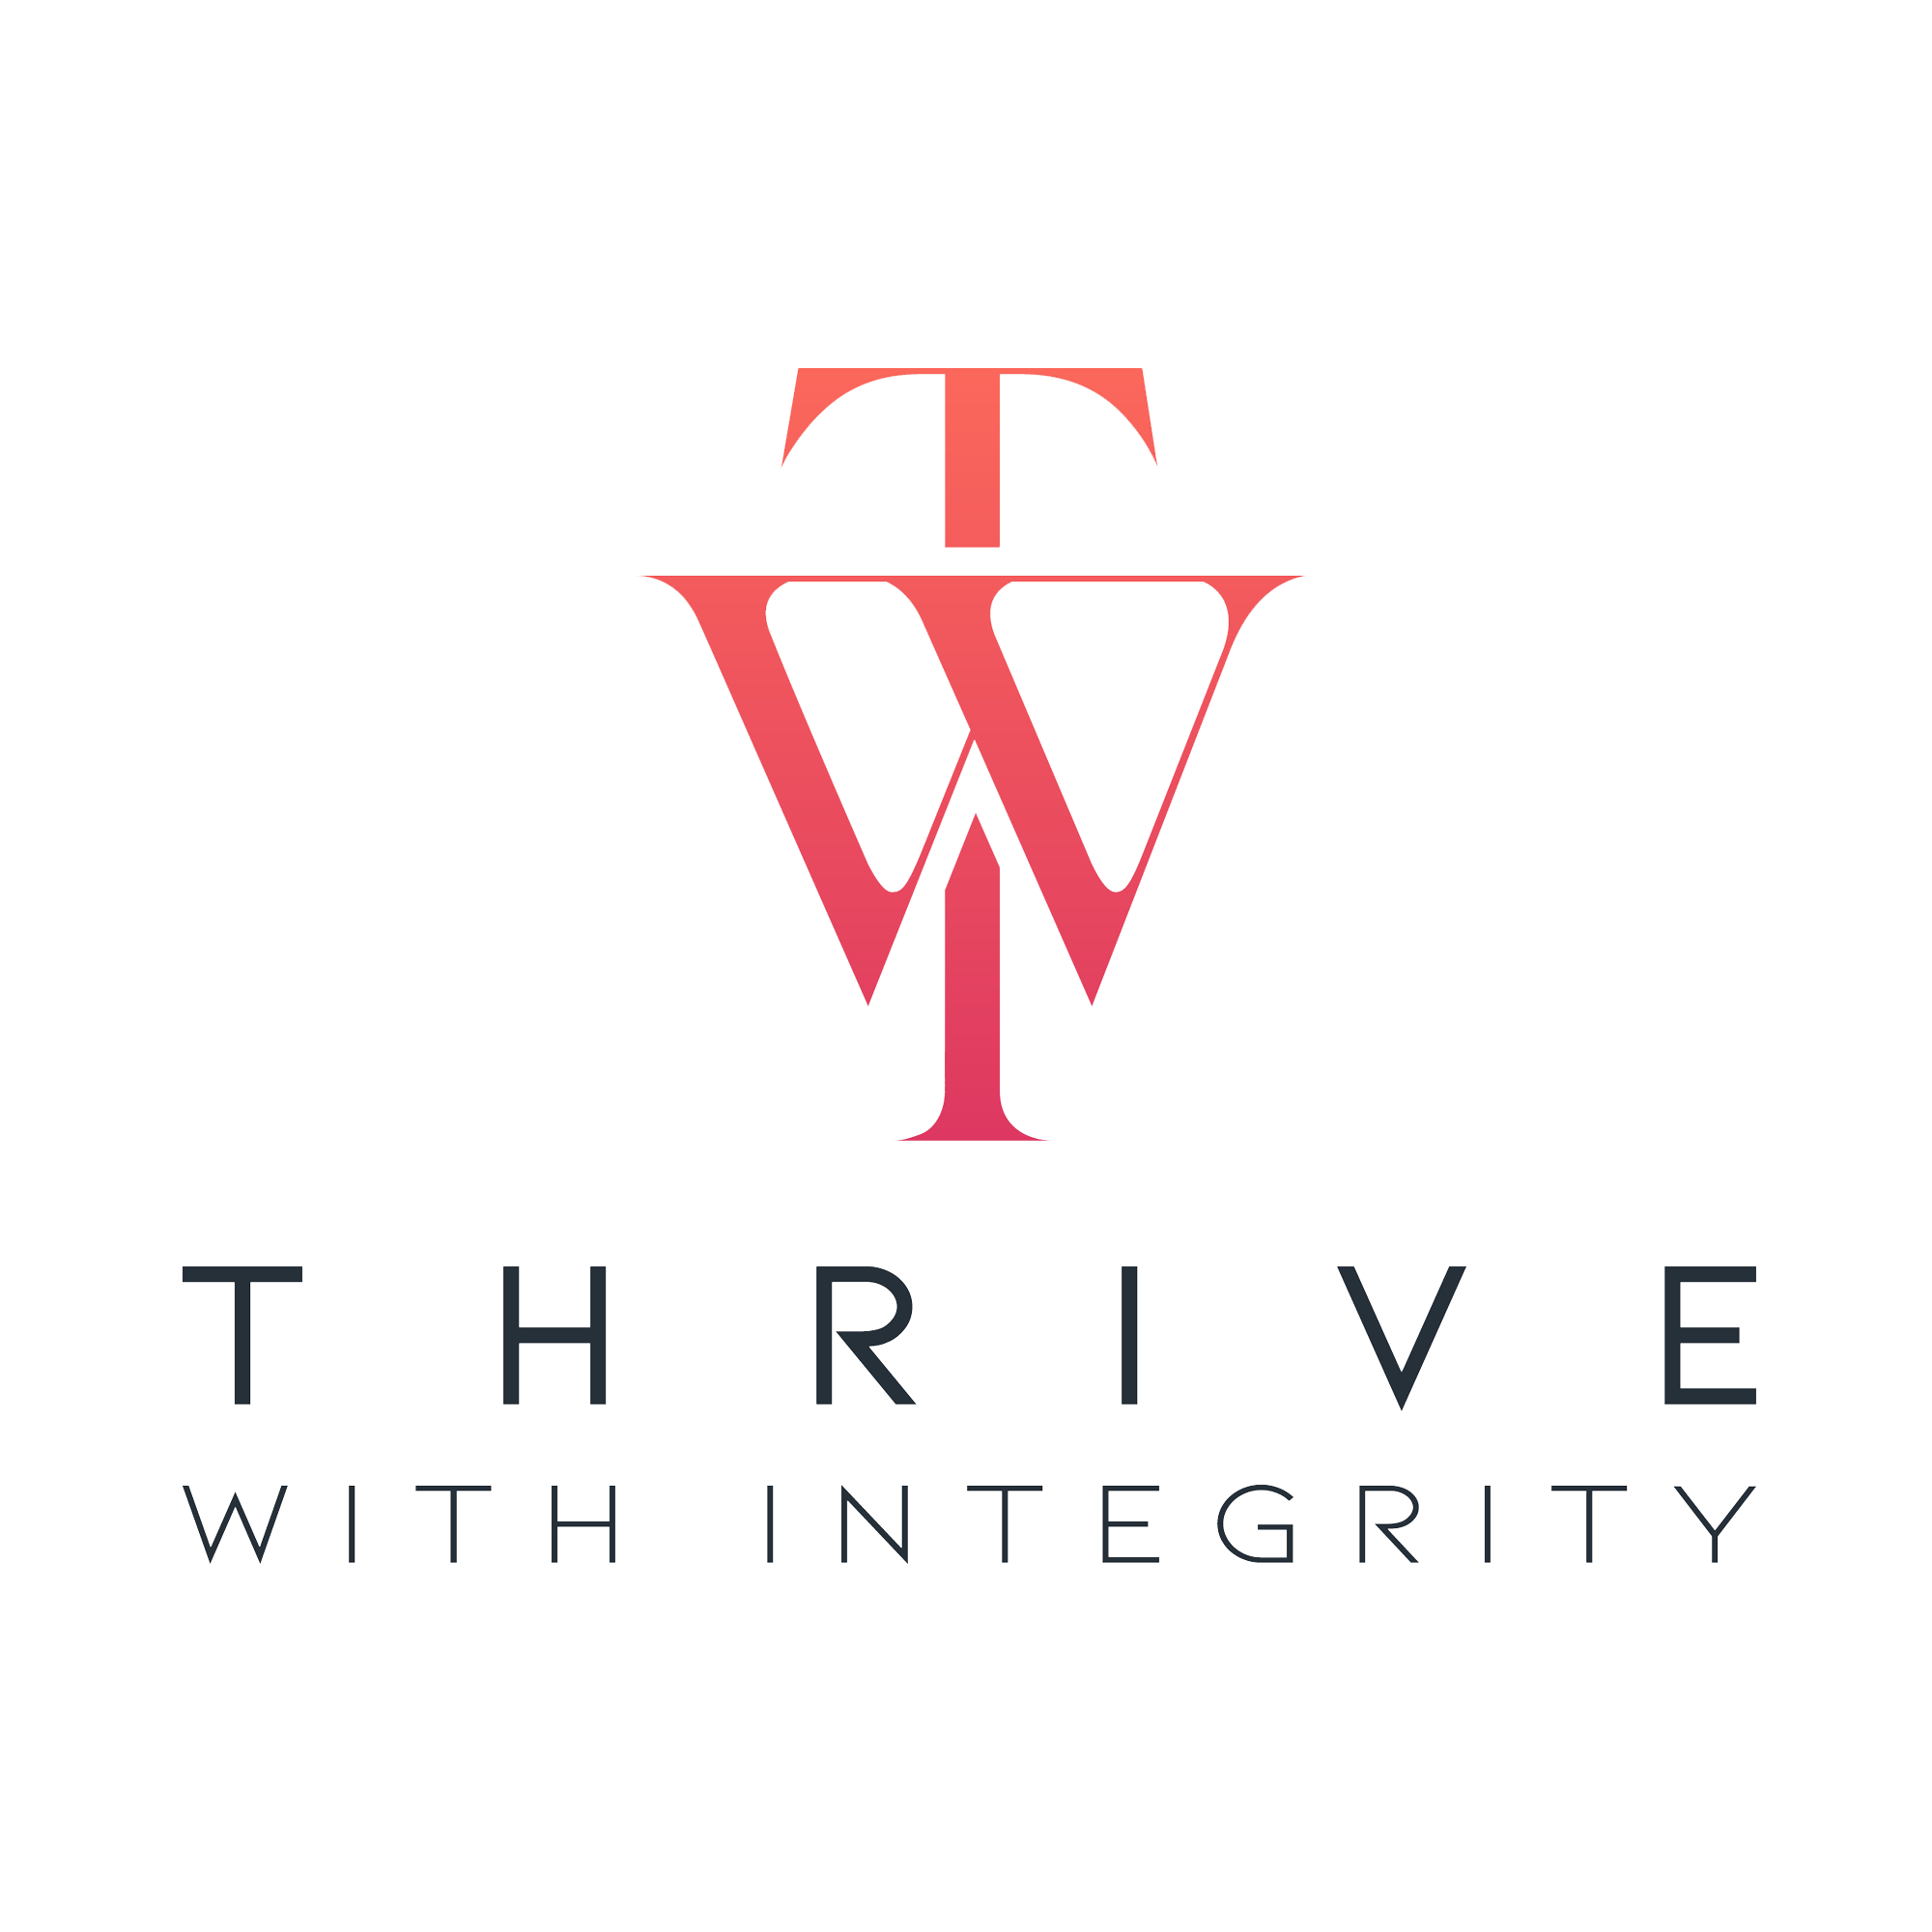 Thrive With Integrity - Human Resources Consulting Services in Virginia